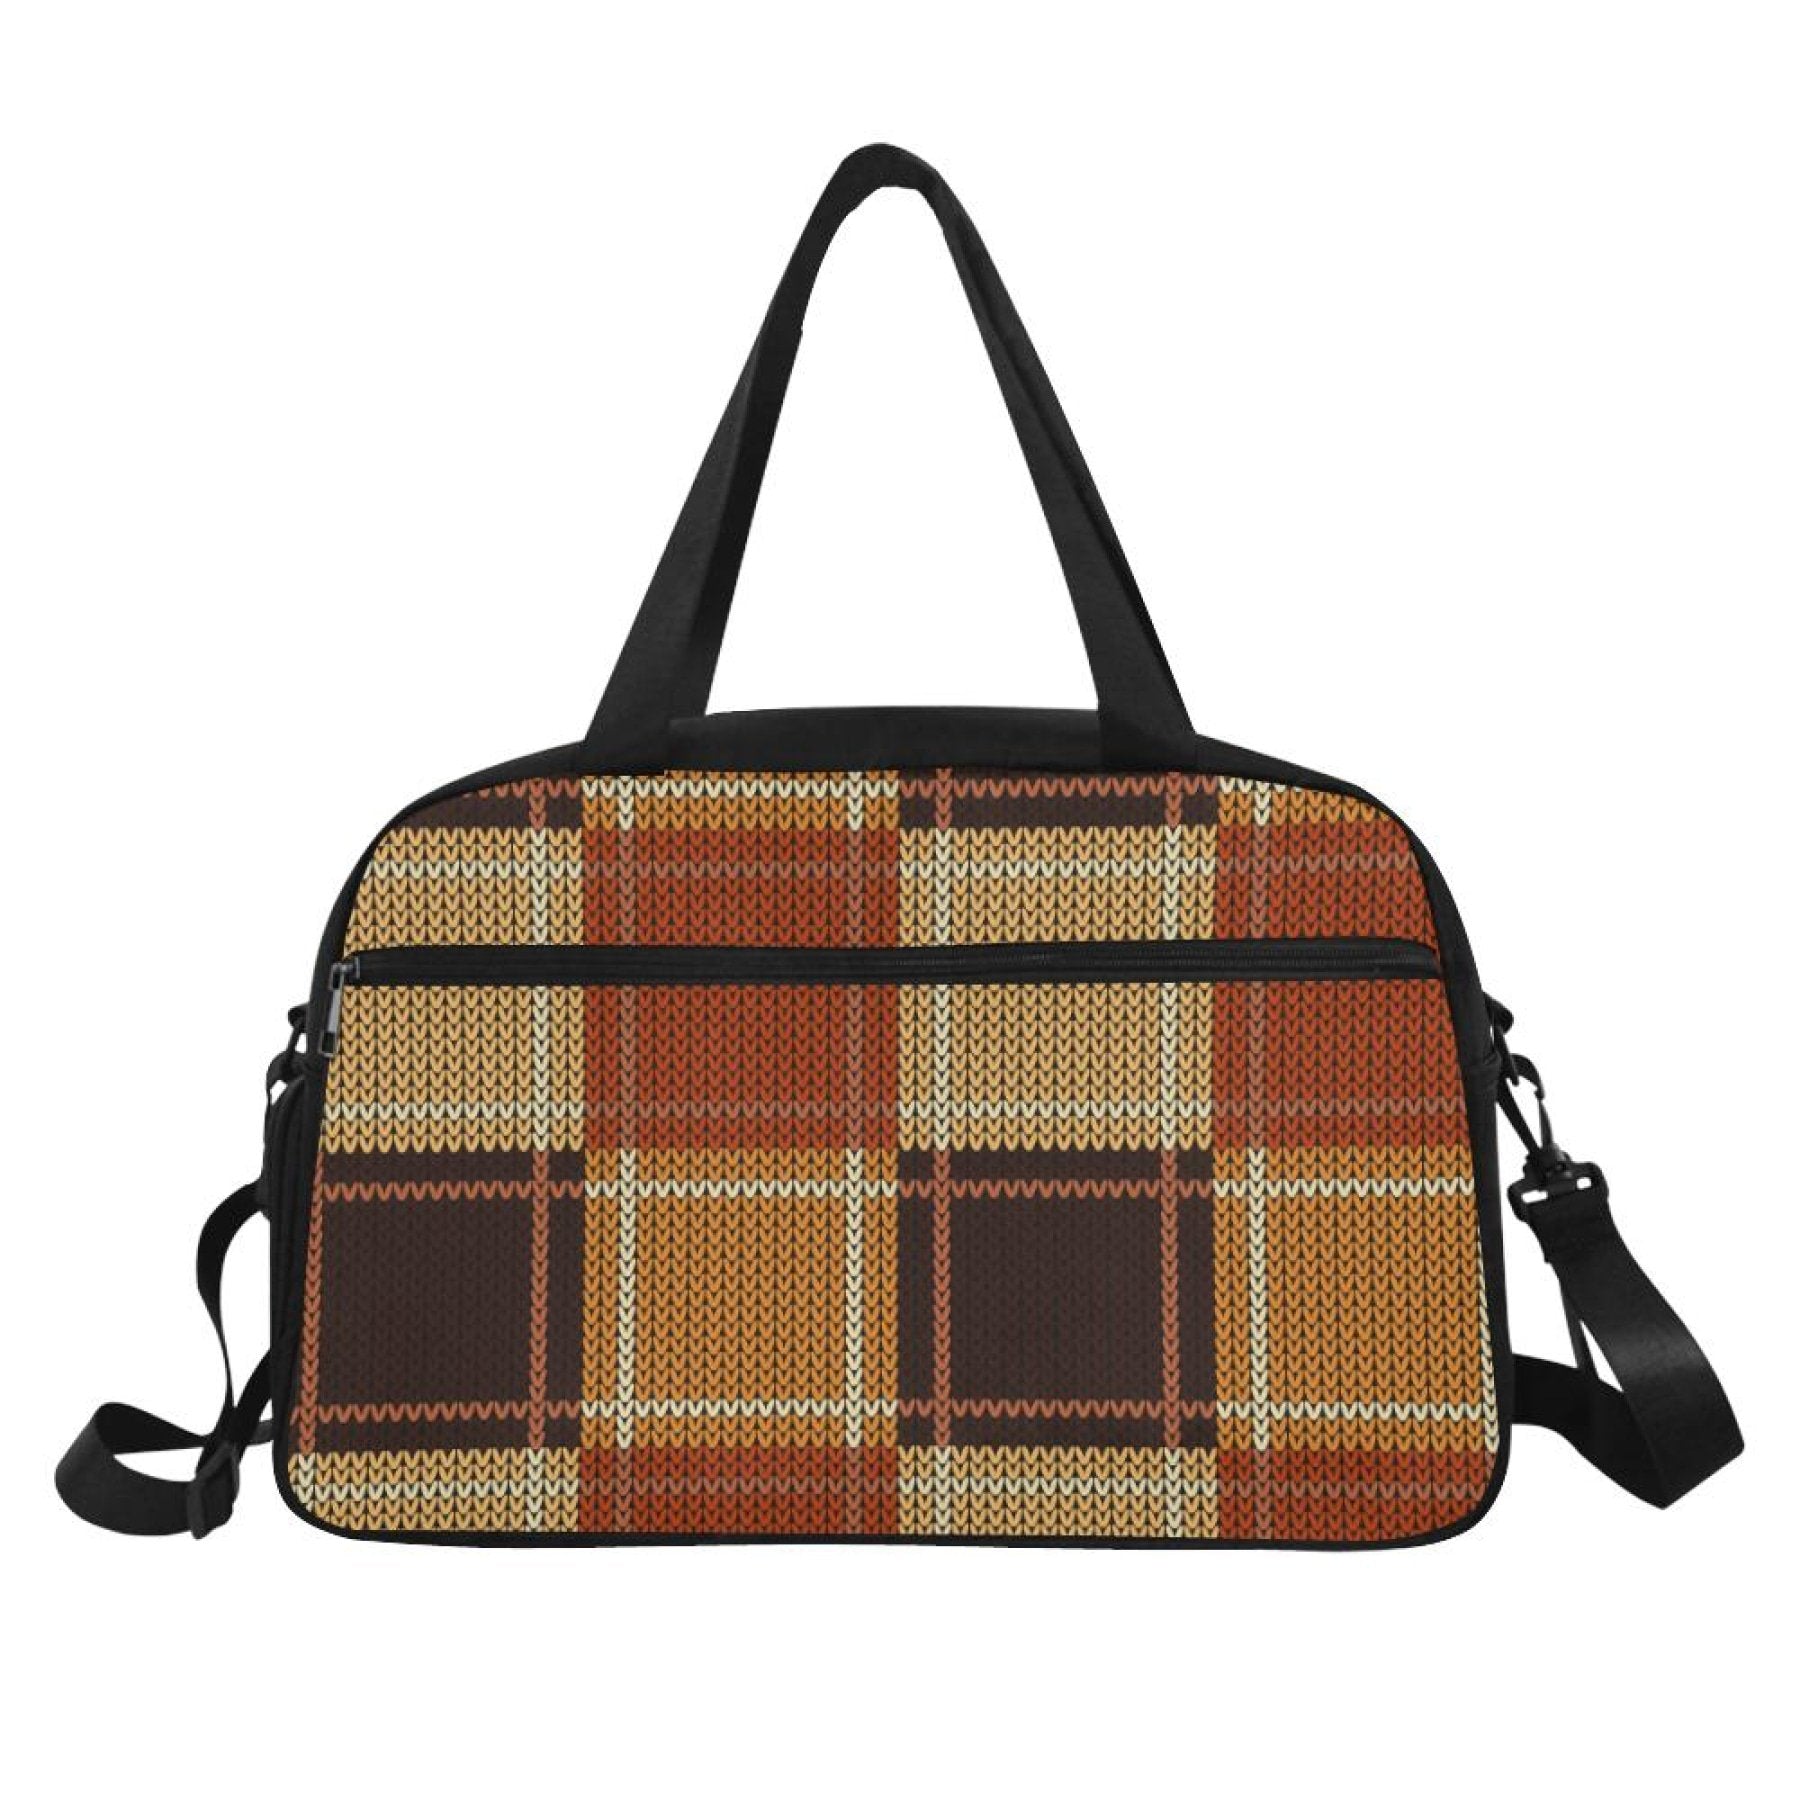 
  
  Travel Carry-on Bag / Brown And Beige Checkered Style
  
